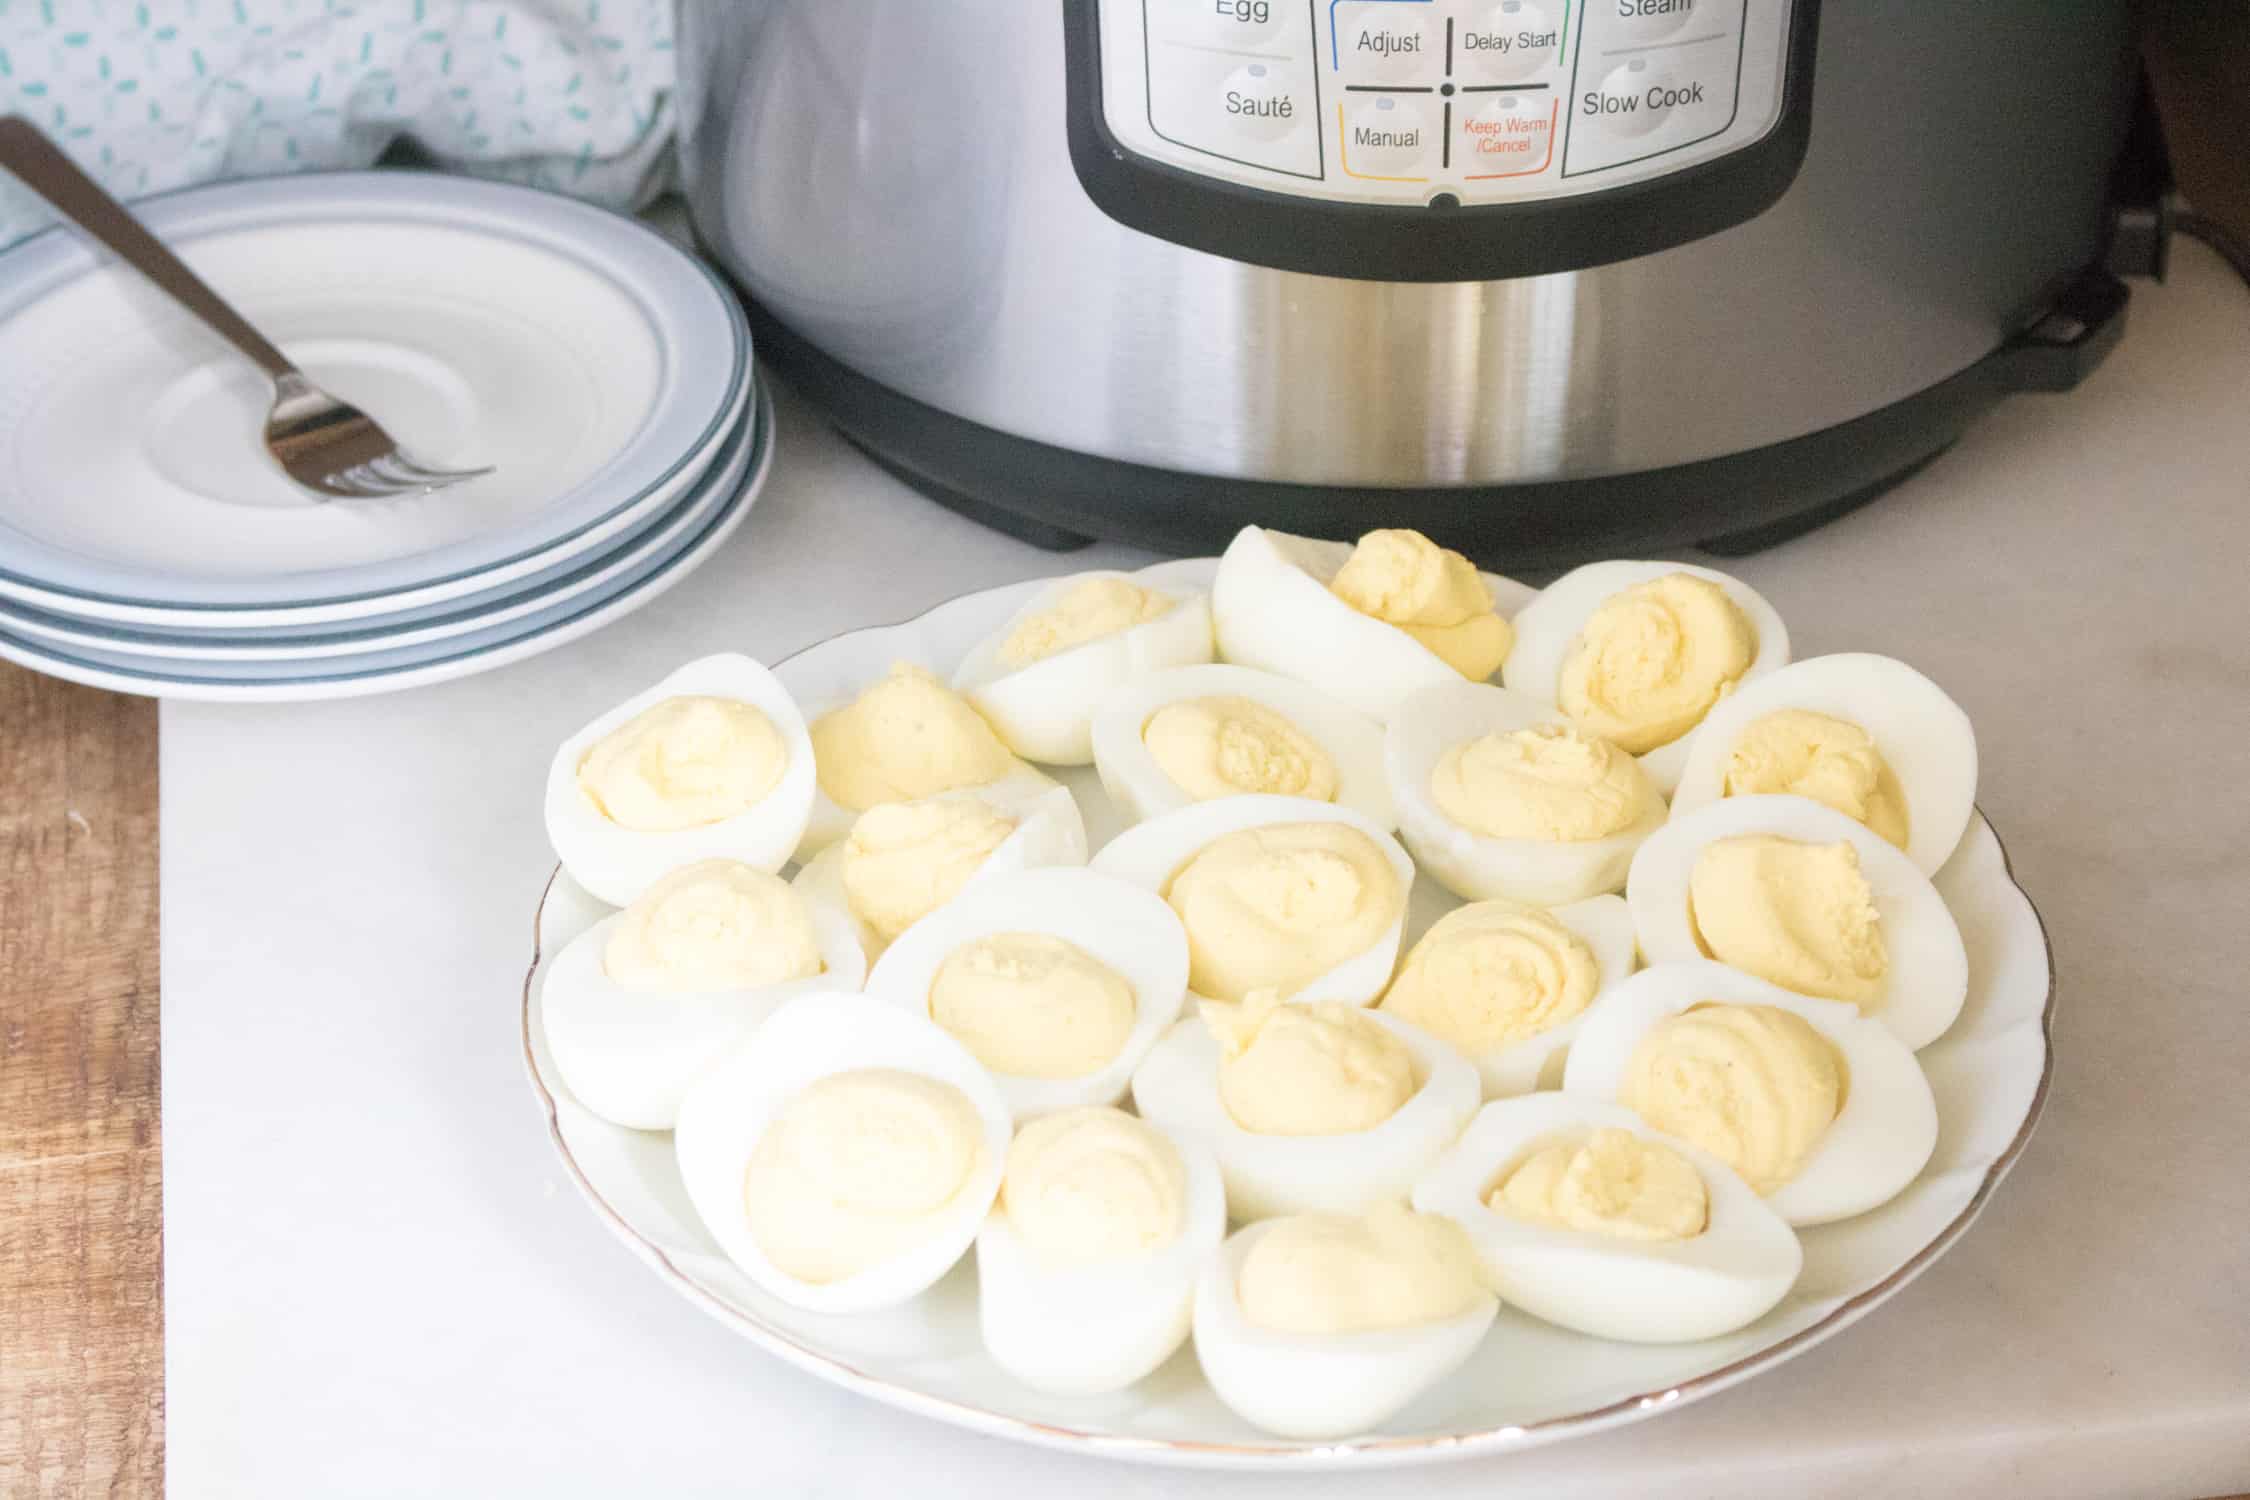 finished instant pot deviled eggs on white plate with additional white and blue plates in background next to instant pot